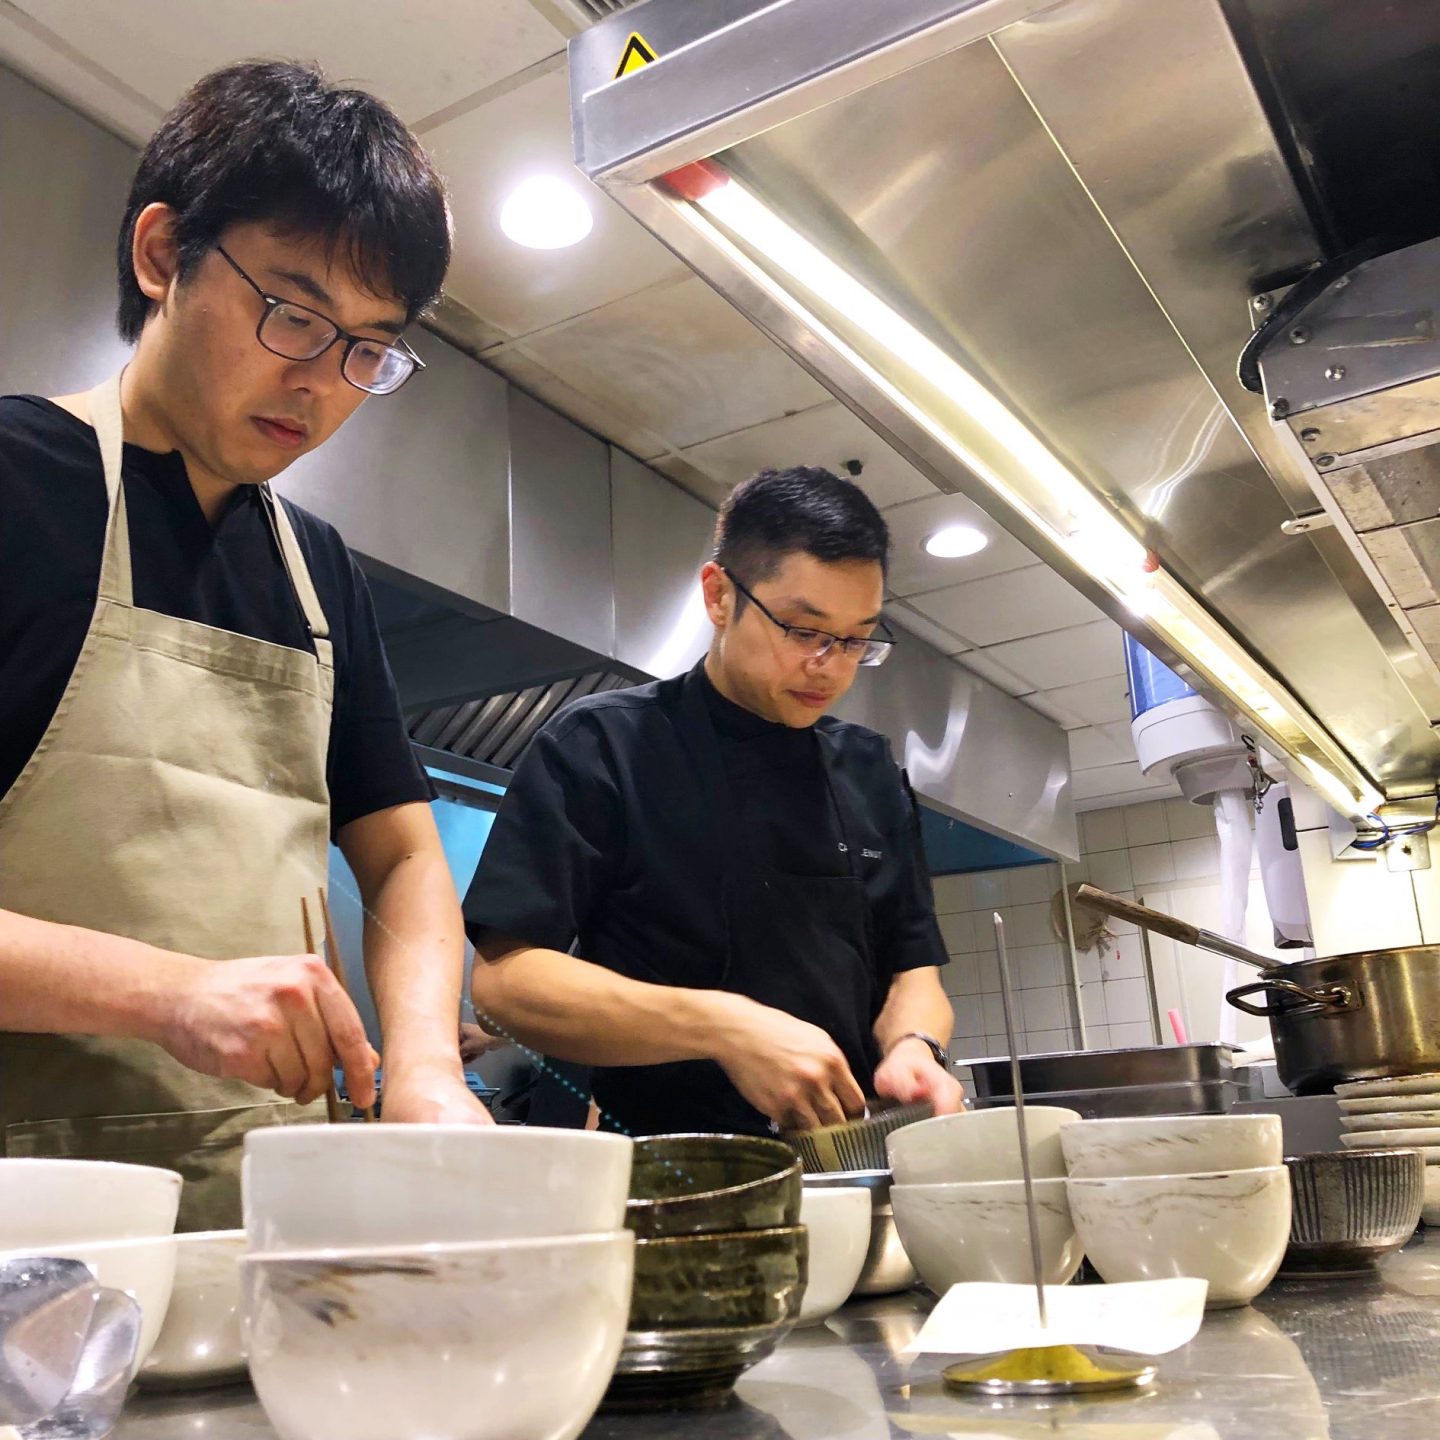 Chef Gan Ming Kiat (left) of restaurant Mustard Seed learned the intricacies of Peranakan cooking under Malcolm. In a Wine & Dine article, Ming Kiat shared that Malcolm is a great mentor who is always ready to help and offer advice.